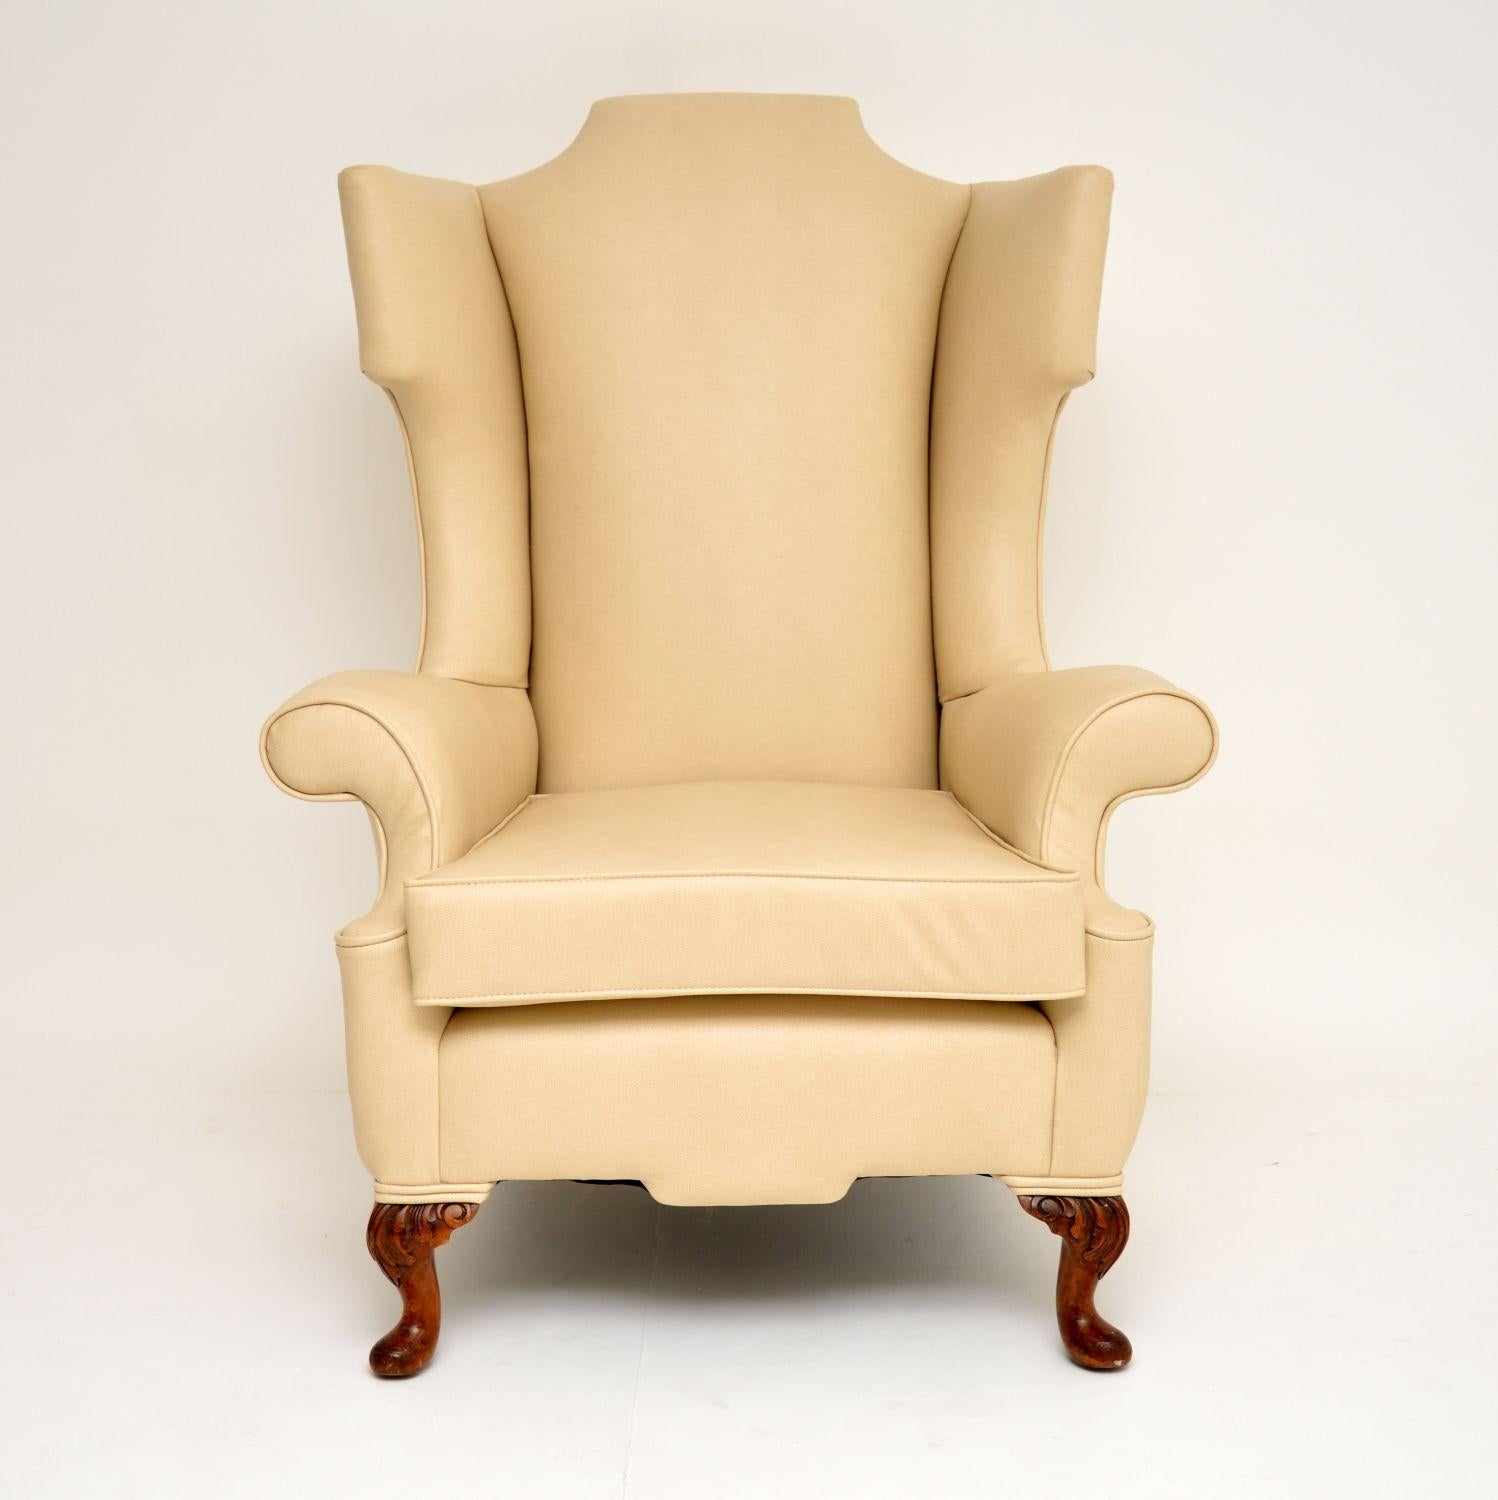 This antique William & Mary style wing armchair is extremely comfortable with good back support and generous proportions.

It’s just been re-upholstered in a top quality imitation textured leather, which has a lovely soft feel and actually feels